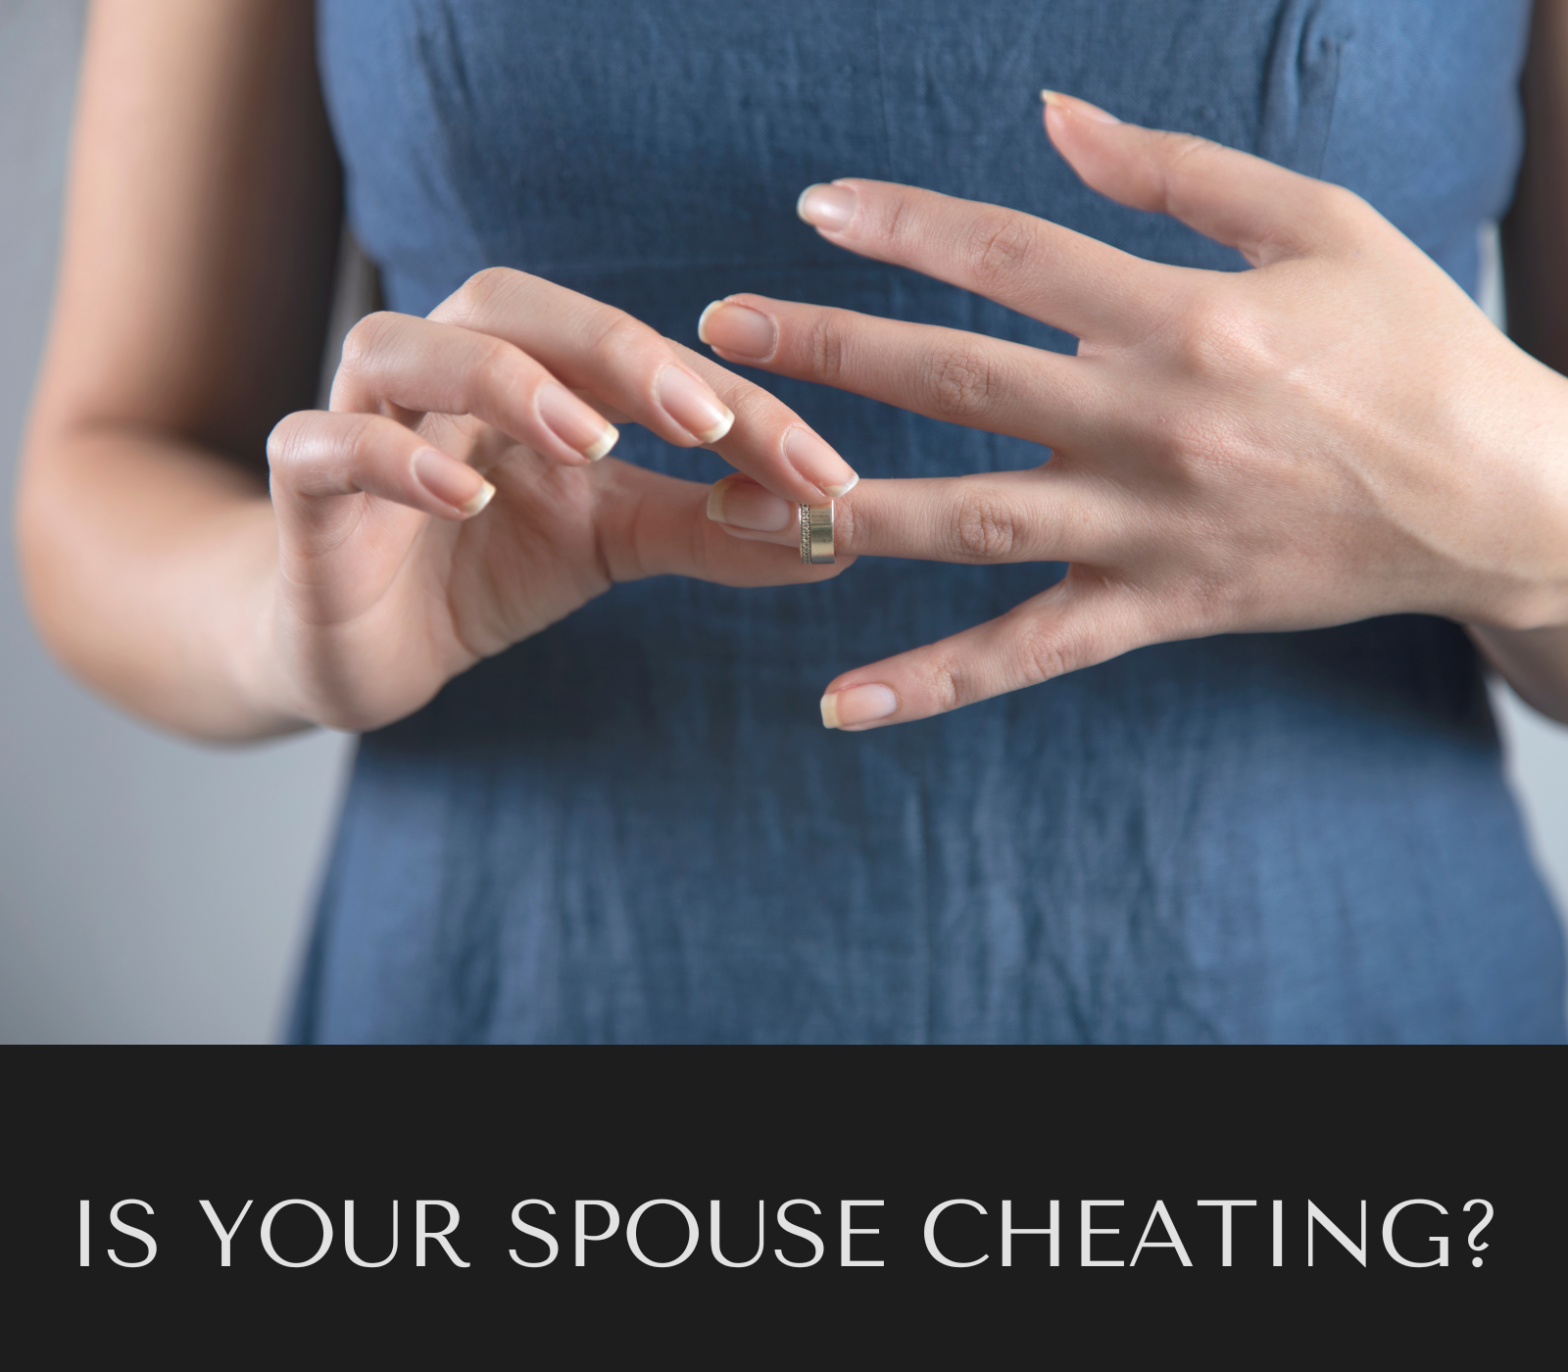 Signs your partner is cheating on you